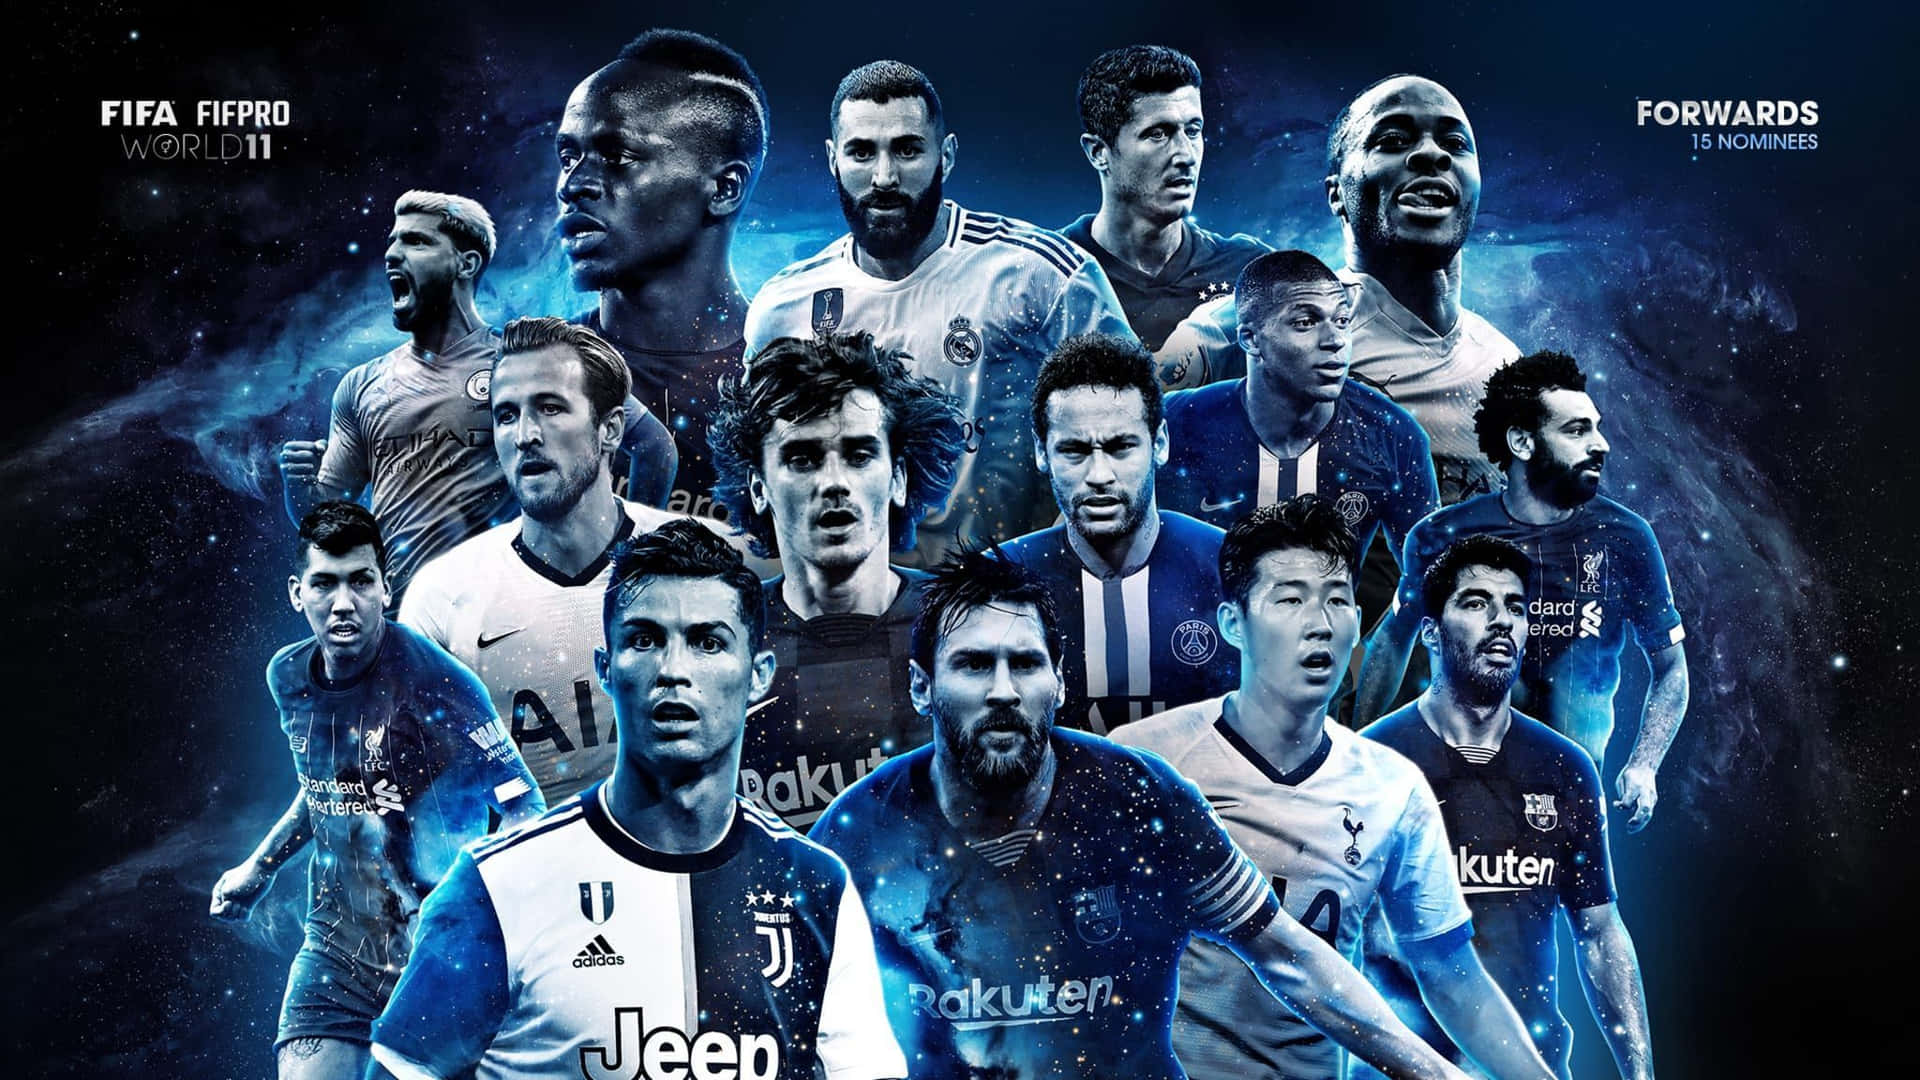 Football players come together to form an admirable team. Wallpaper